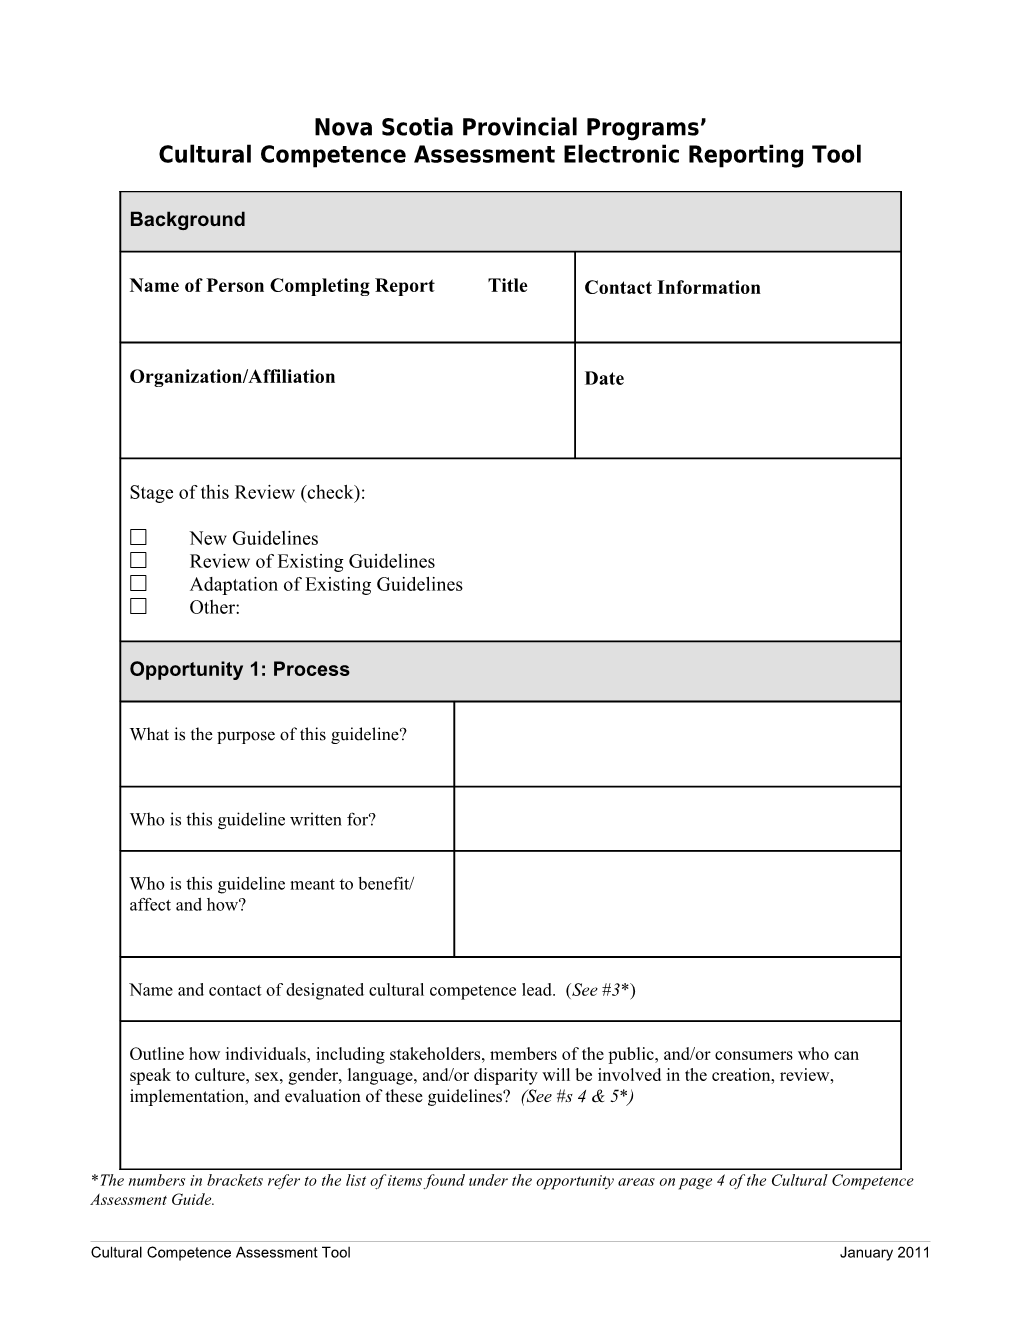 Cultural Competence Assessment Electronic Reporting Tool